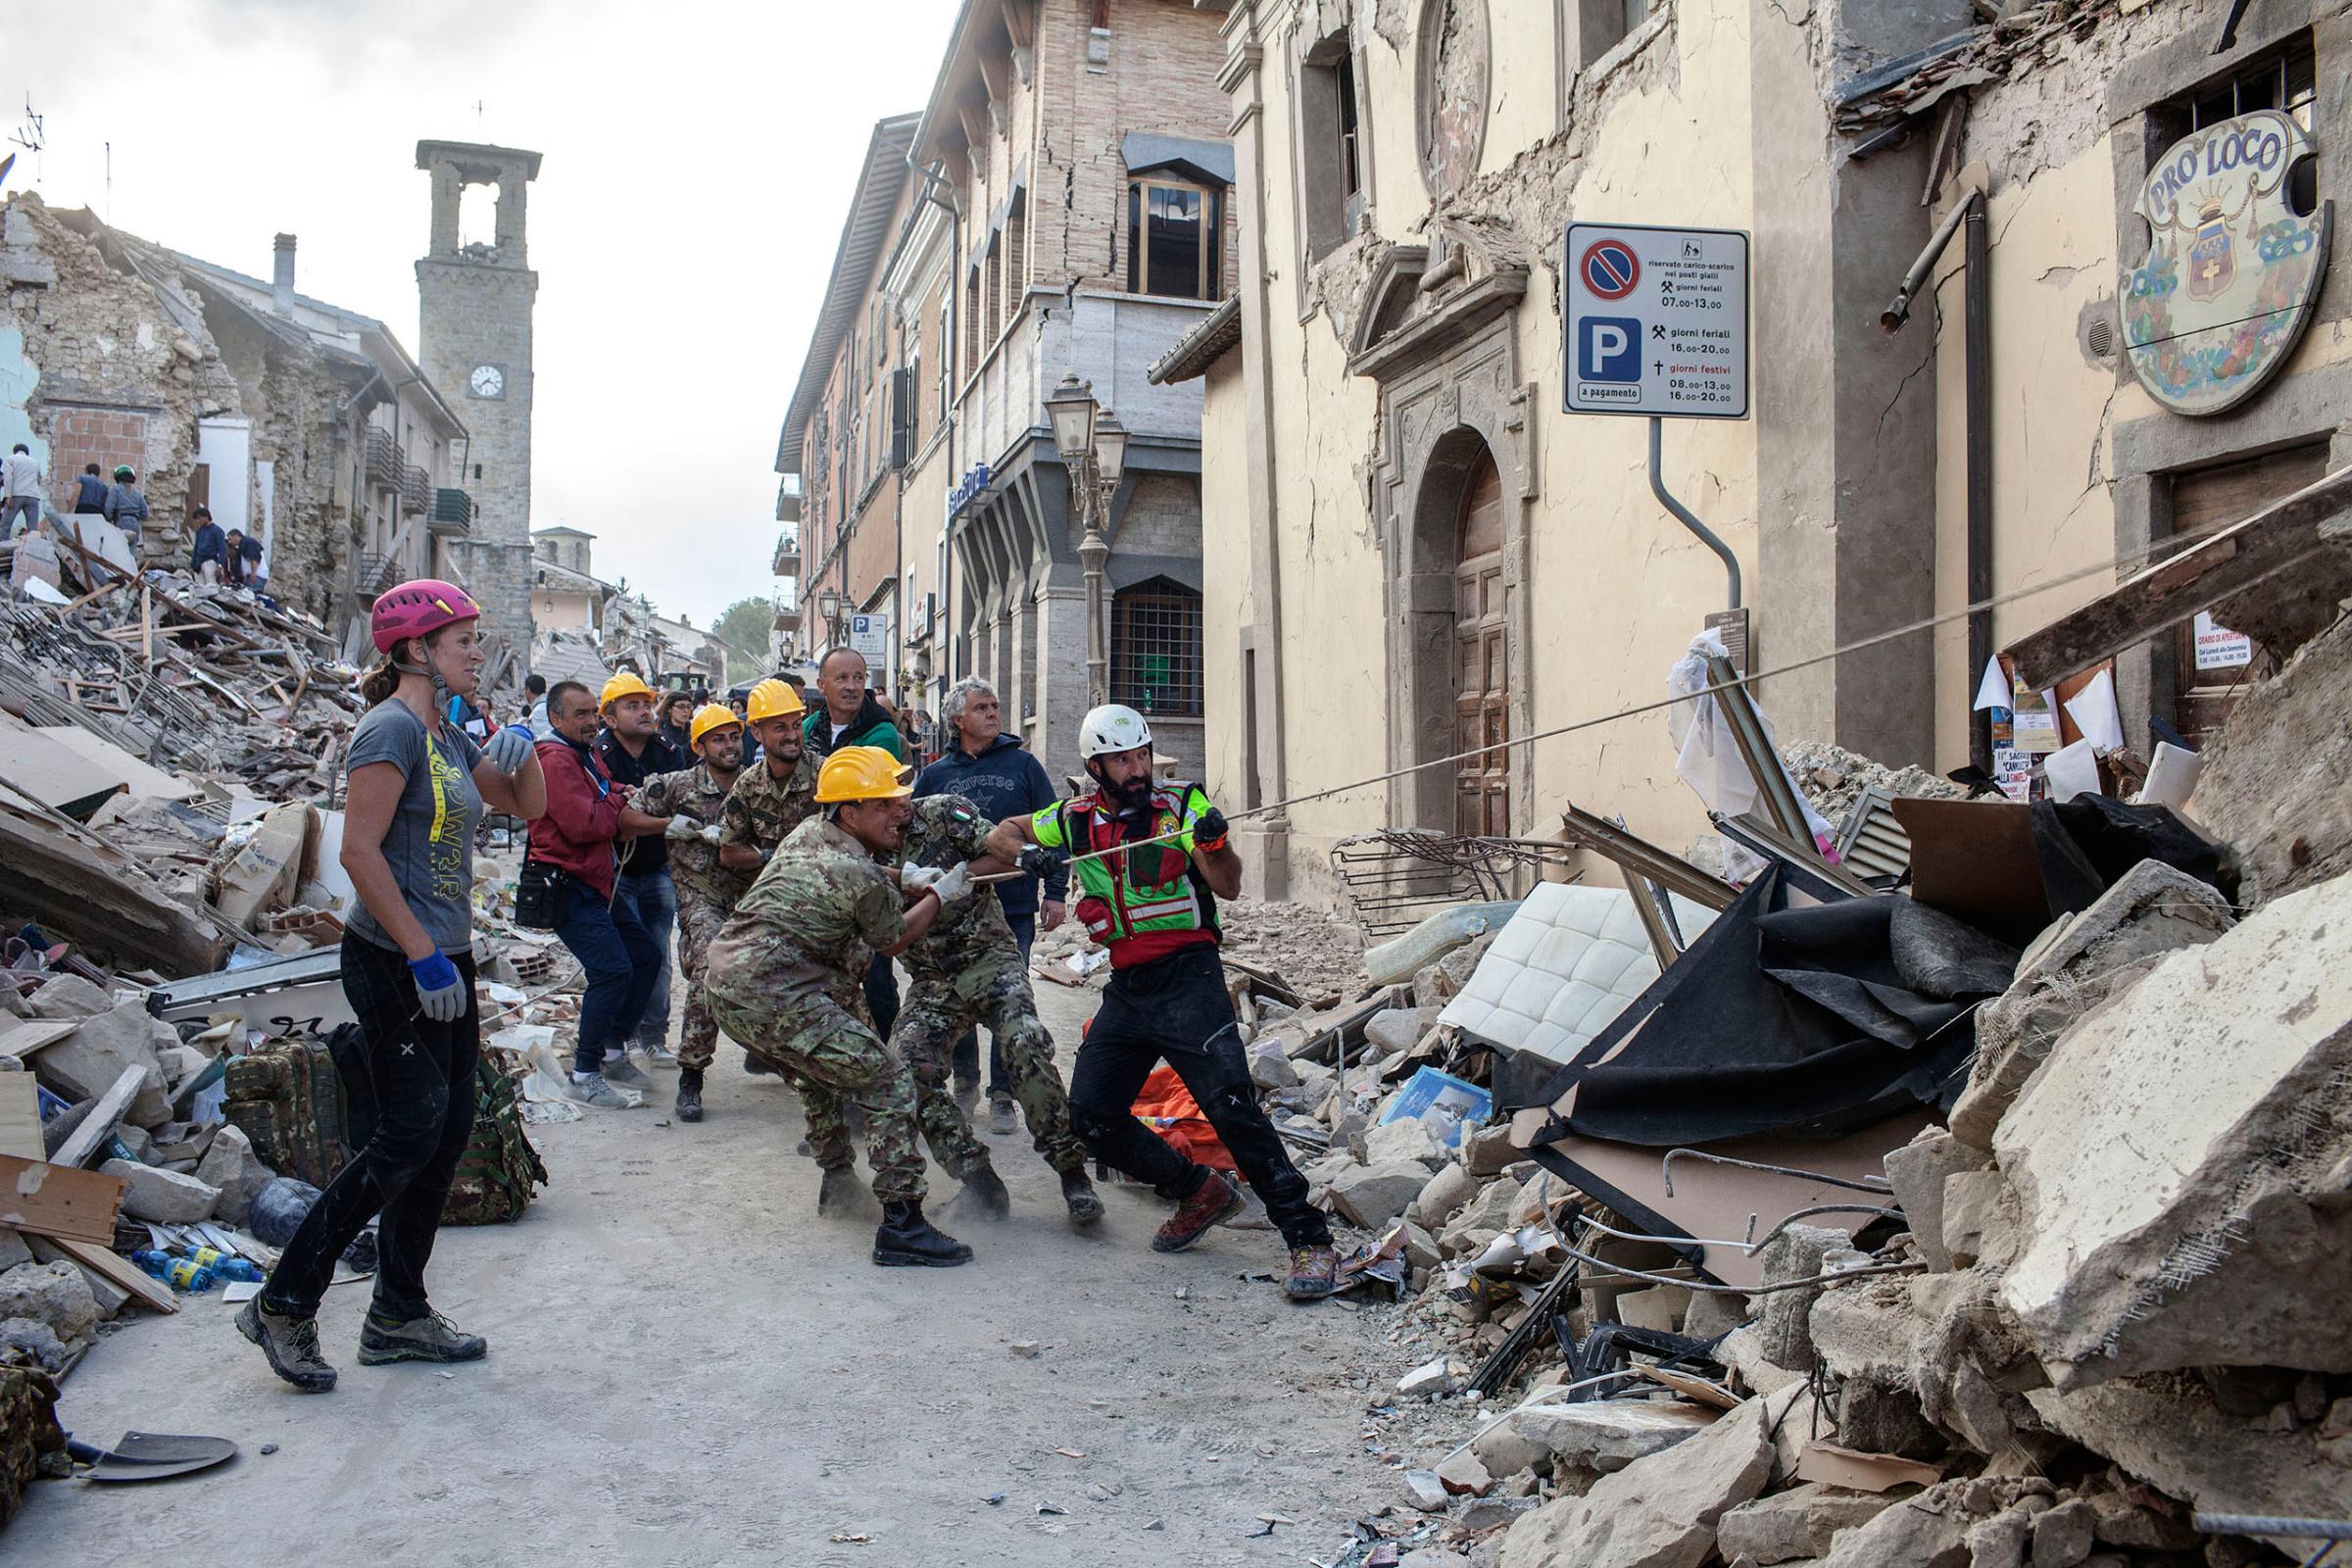 Rescue teams attempt to move the rubble in search of survivors after a 6.2 earthquake hit the town of Amatrice, Italy, on Aug. 24, 2016.